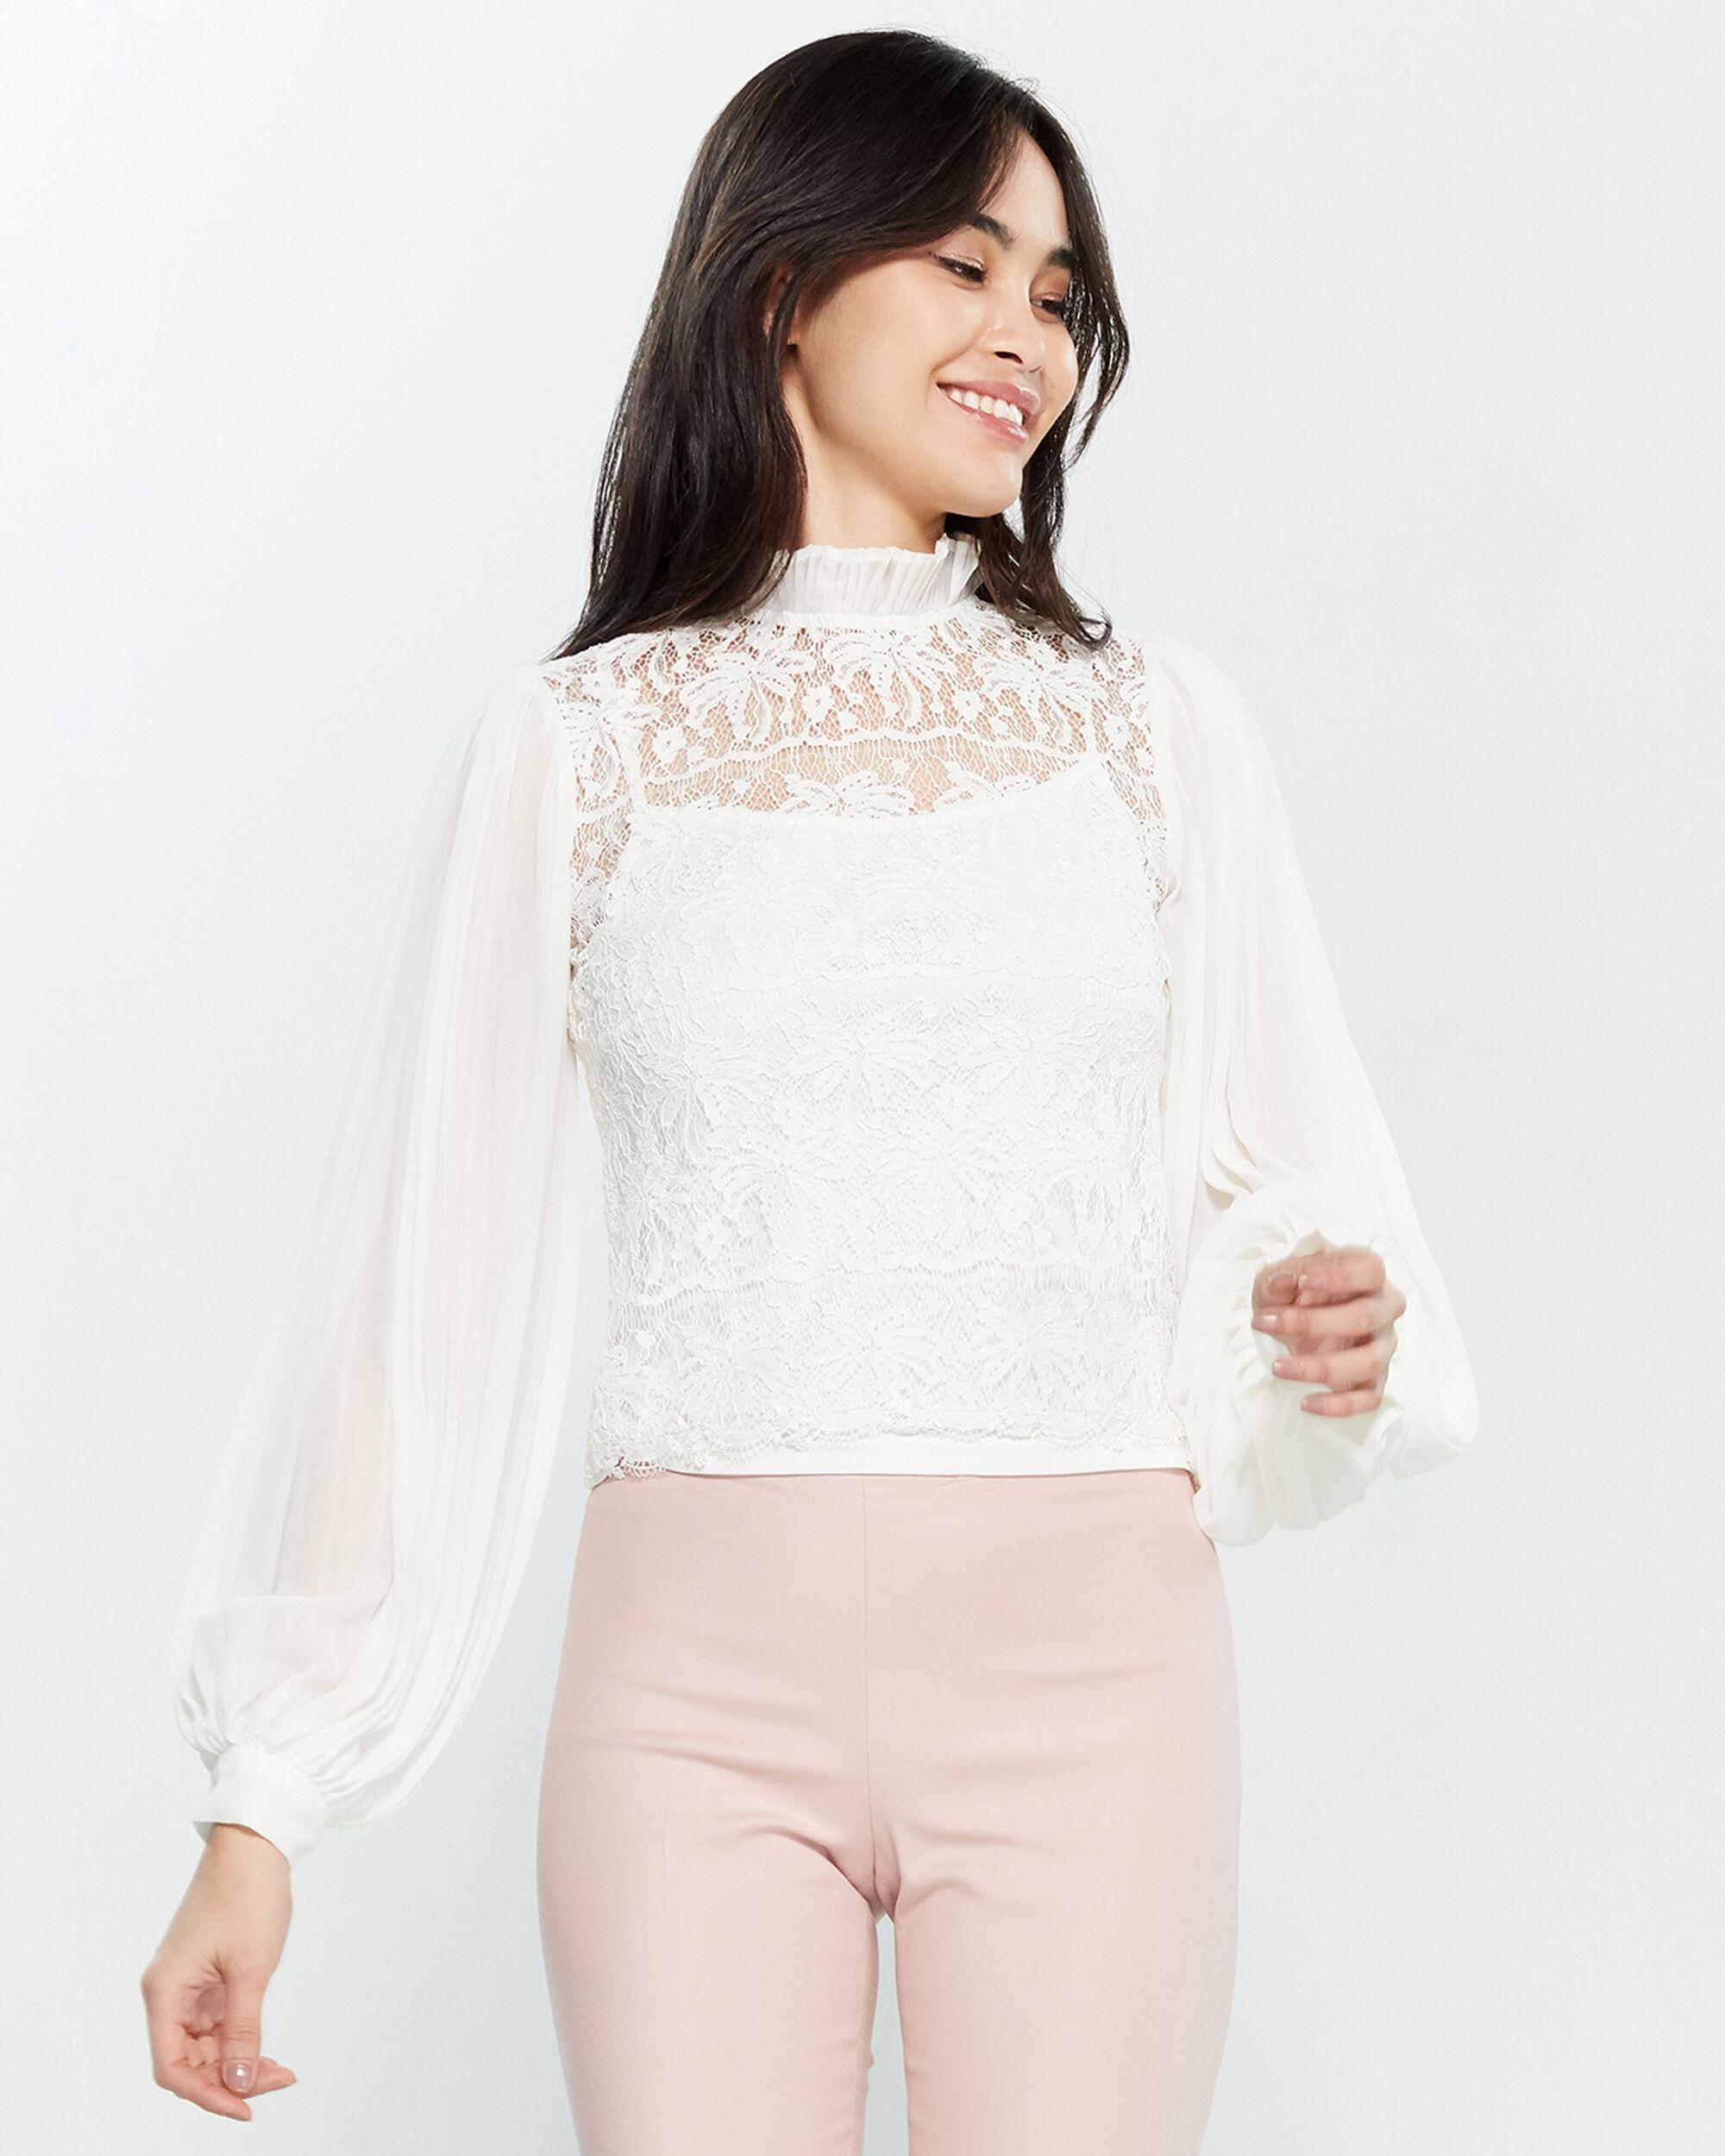 Gracia Pleated Sleeve Lace Top in White - Lyst